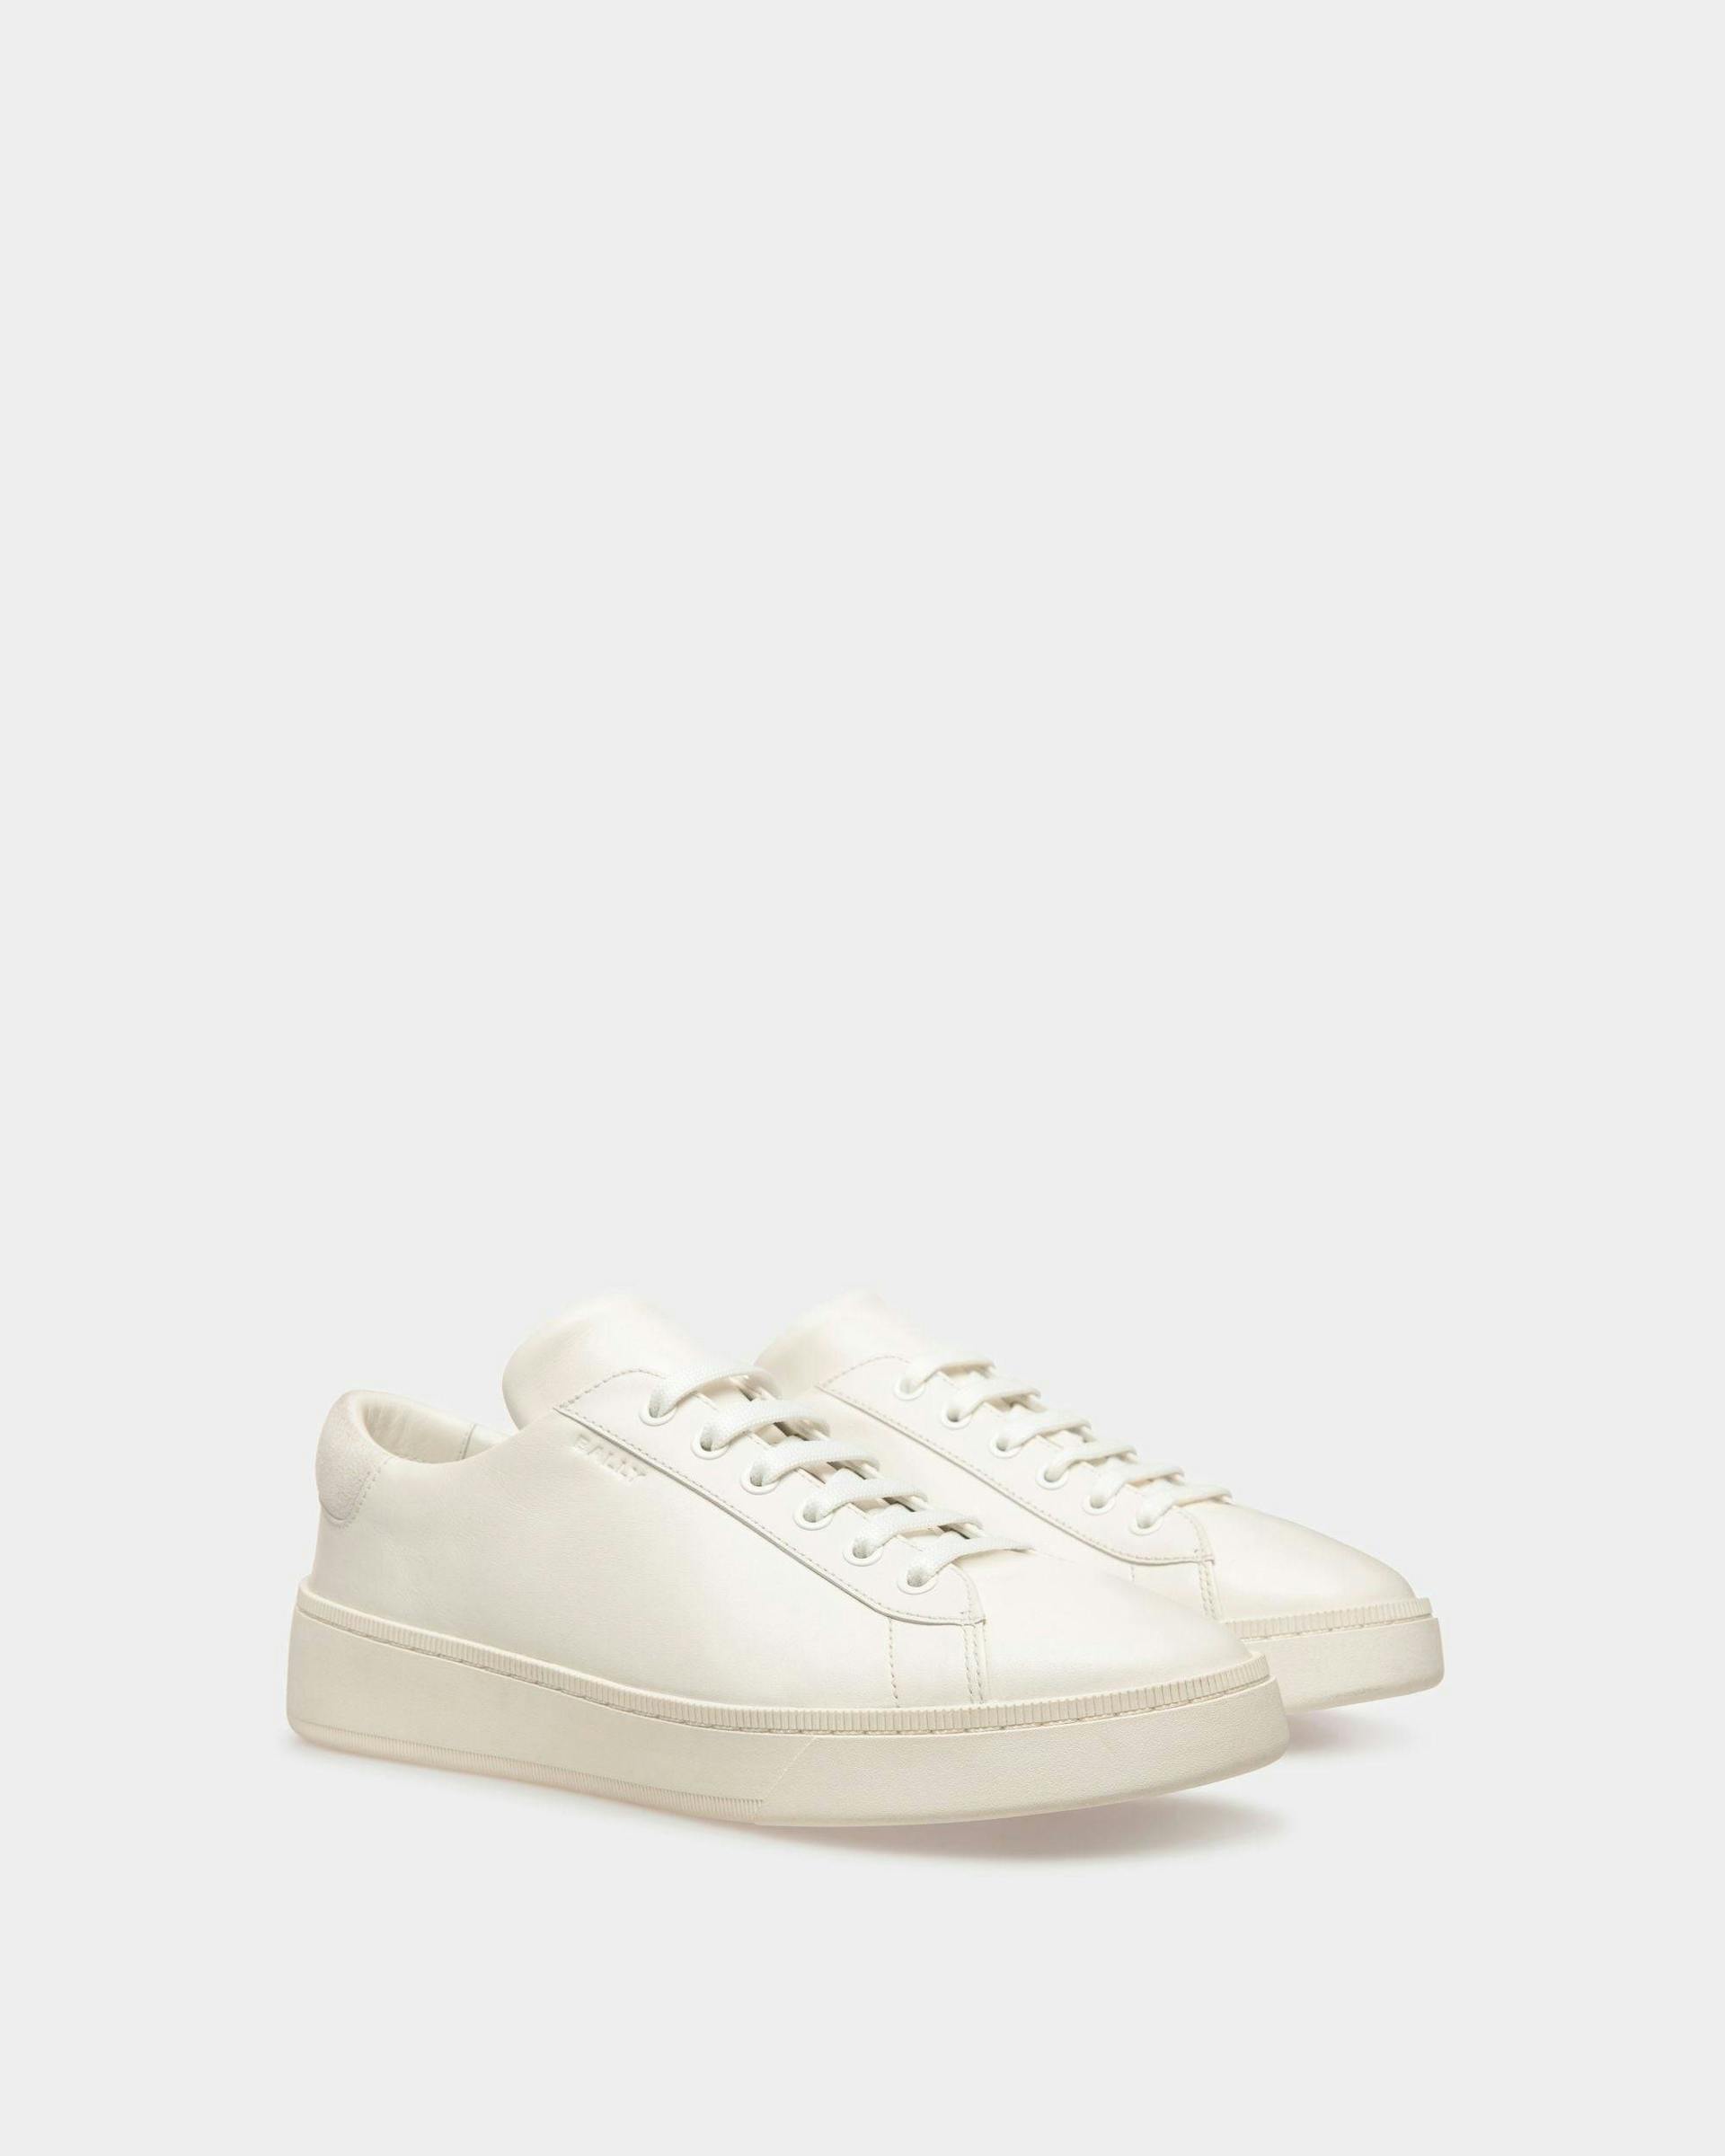 Raise Sneakers In White Leather - Men's - Bally - 04